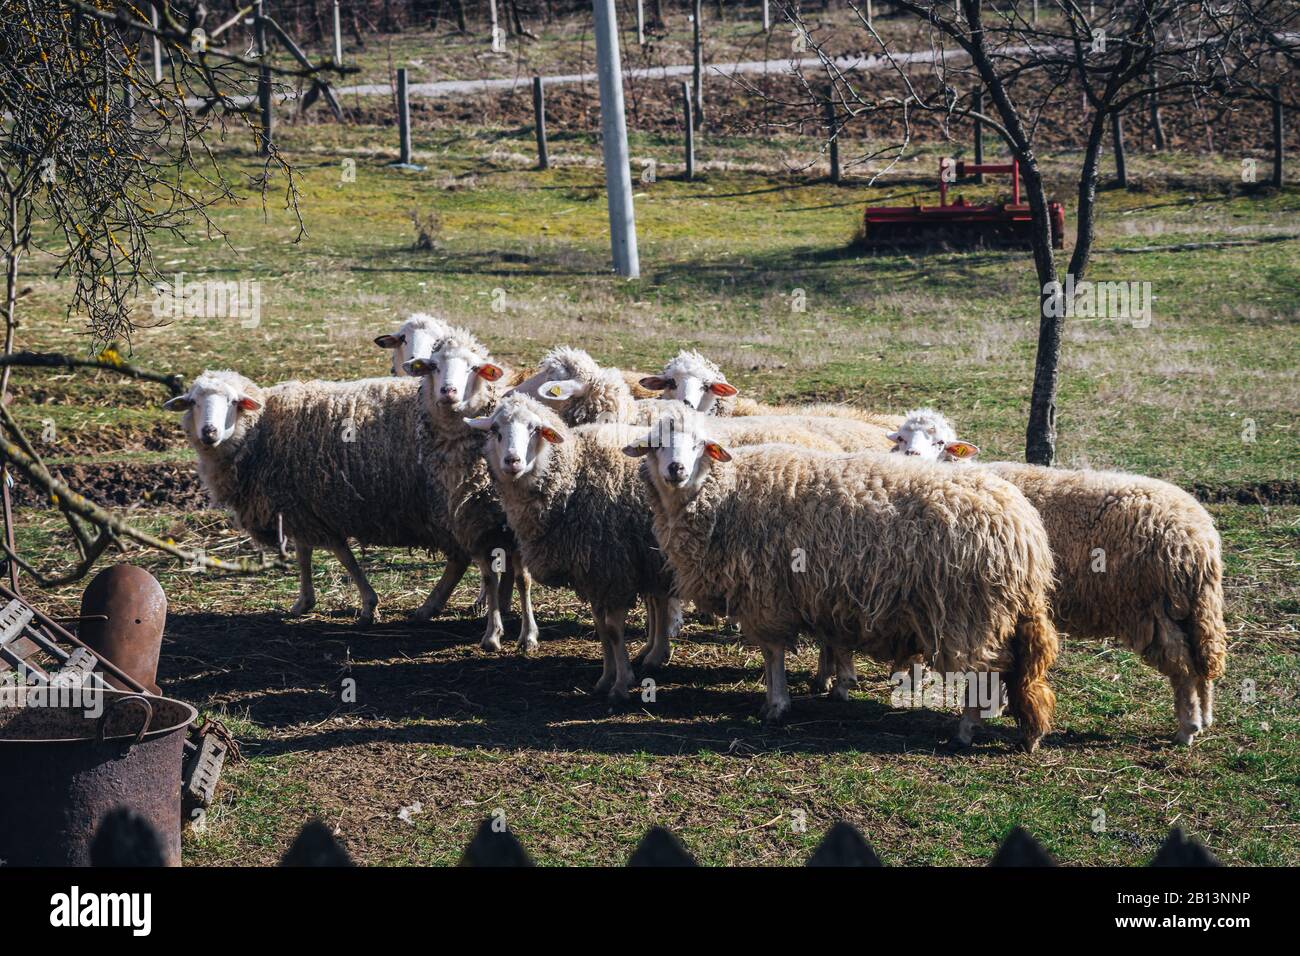 Herd of sheep looking at a camera Stock Photo